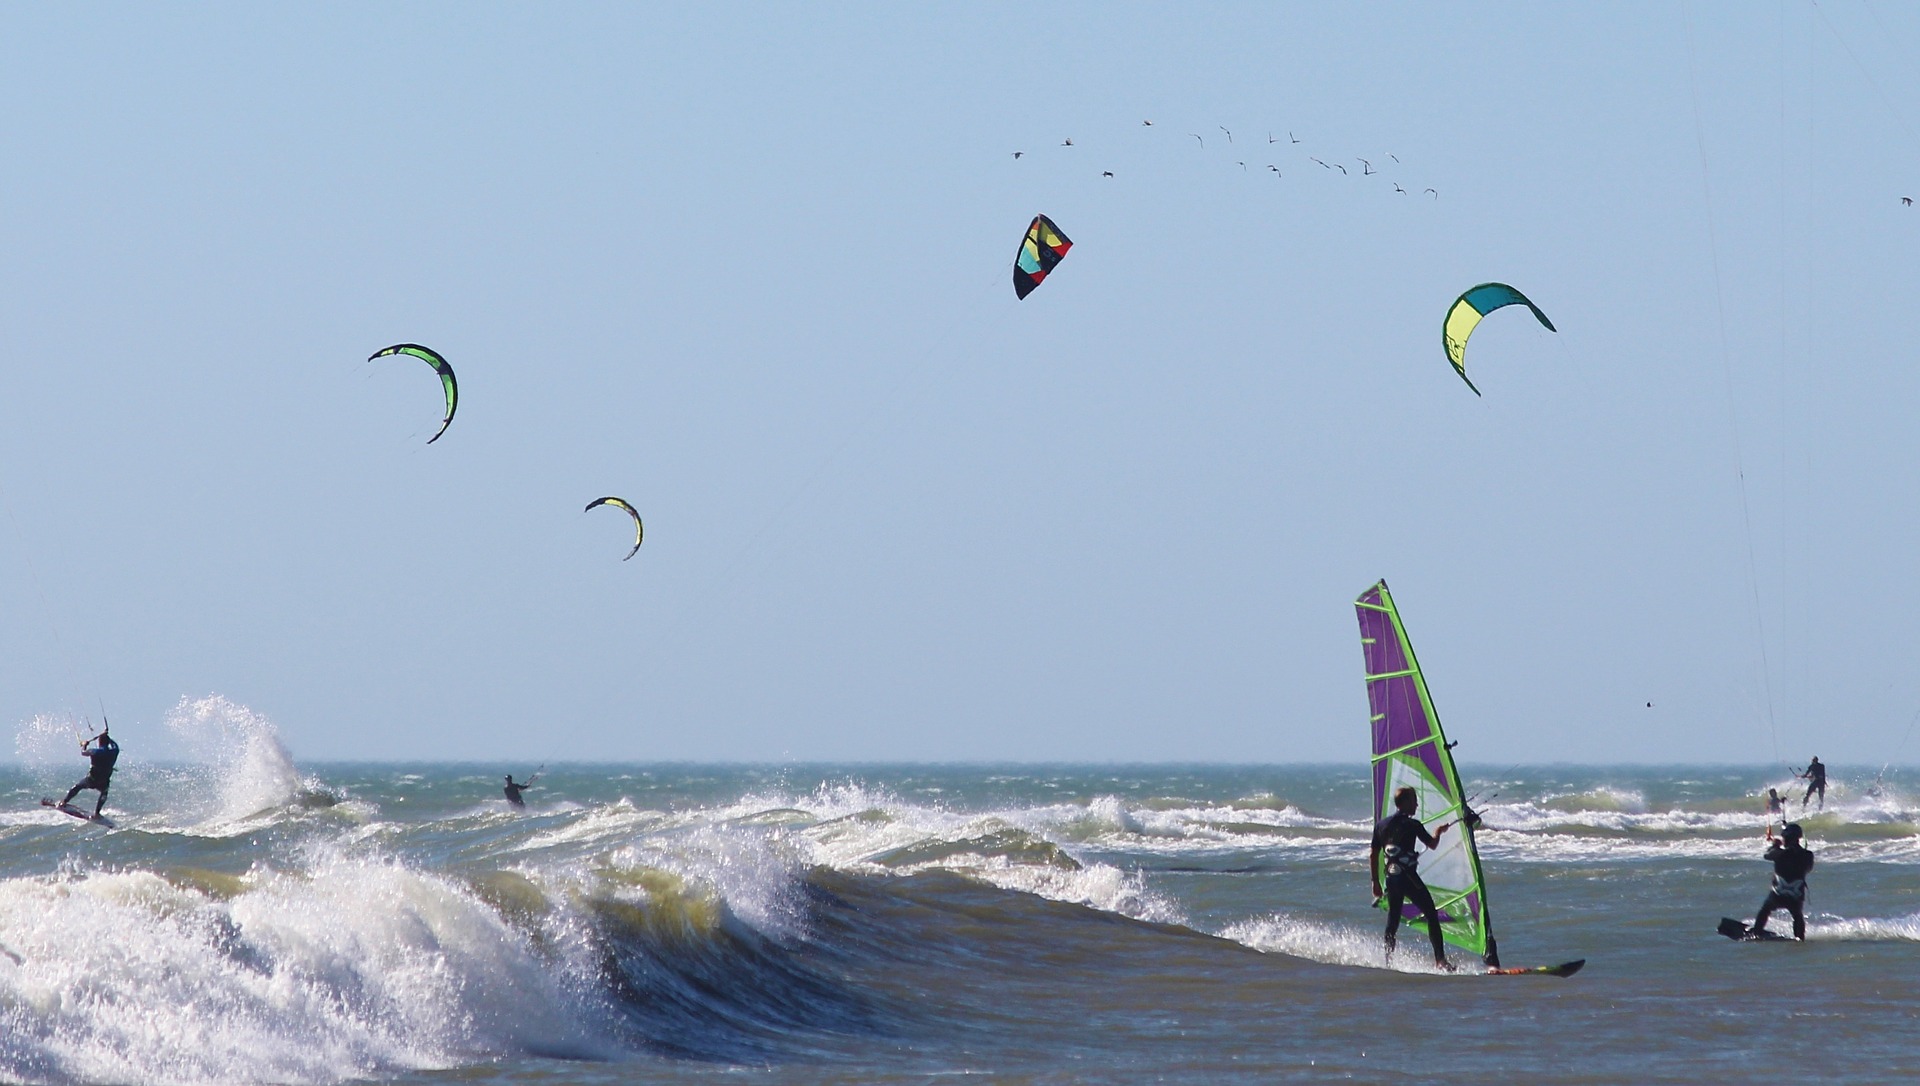 Kitesurfers enjoy a day on the water